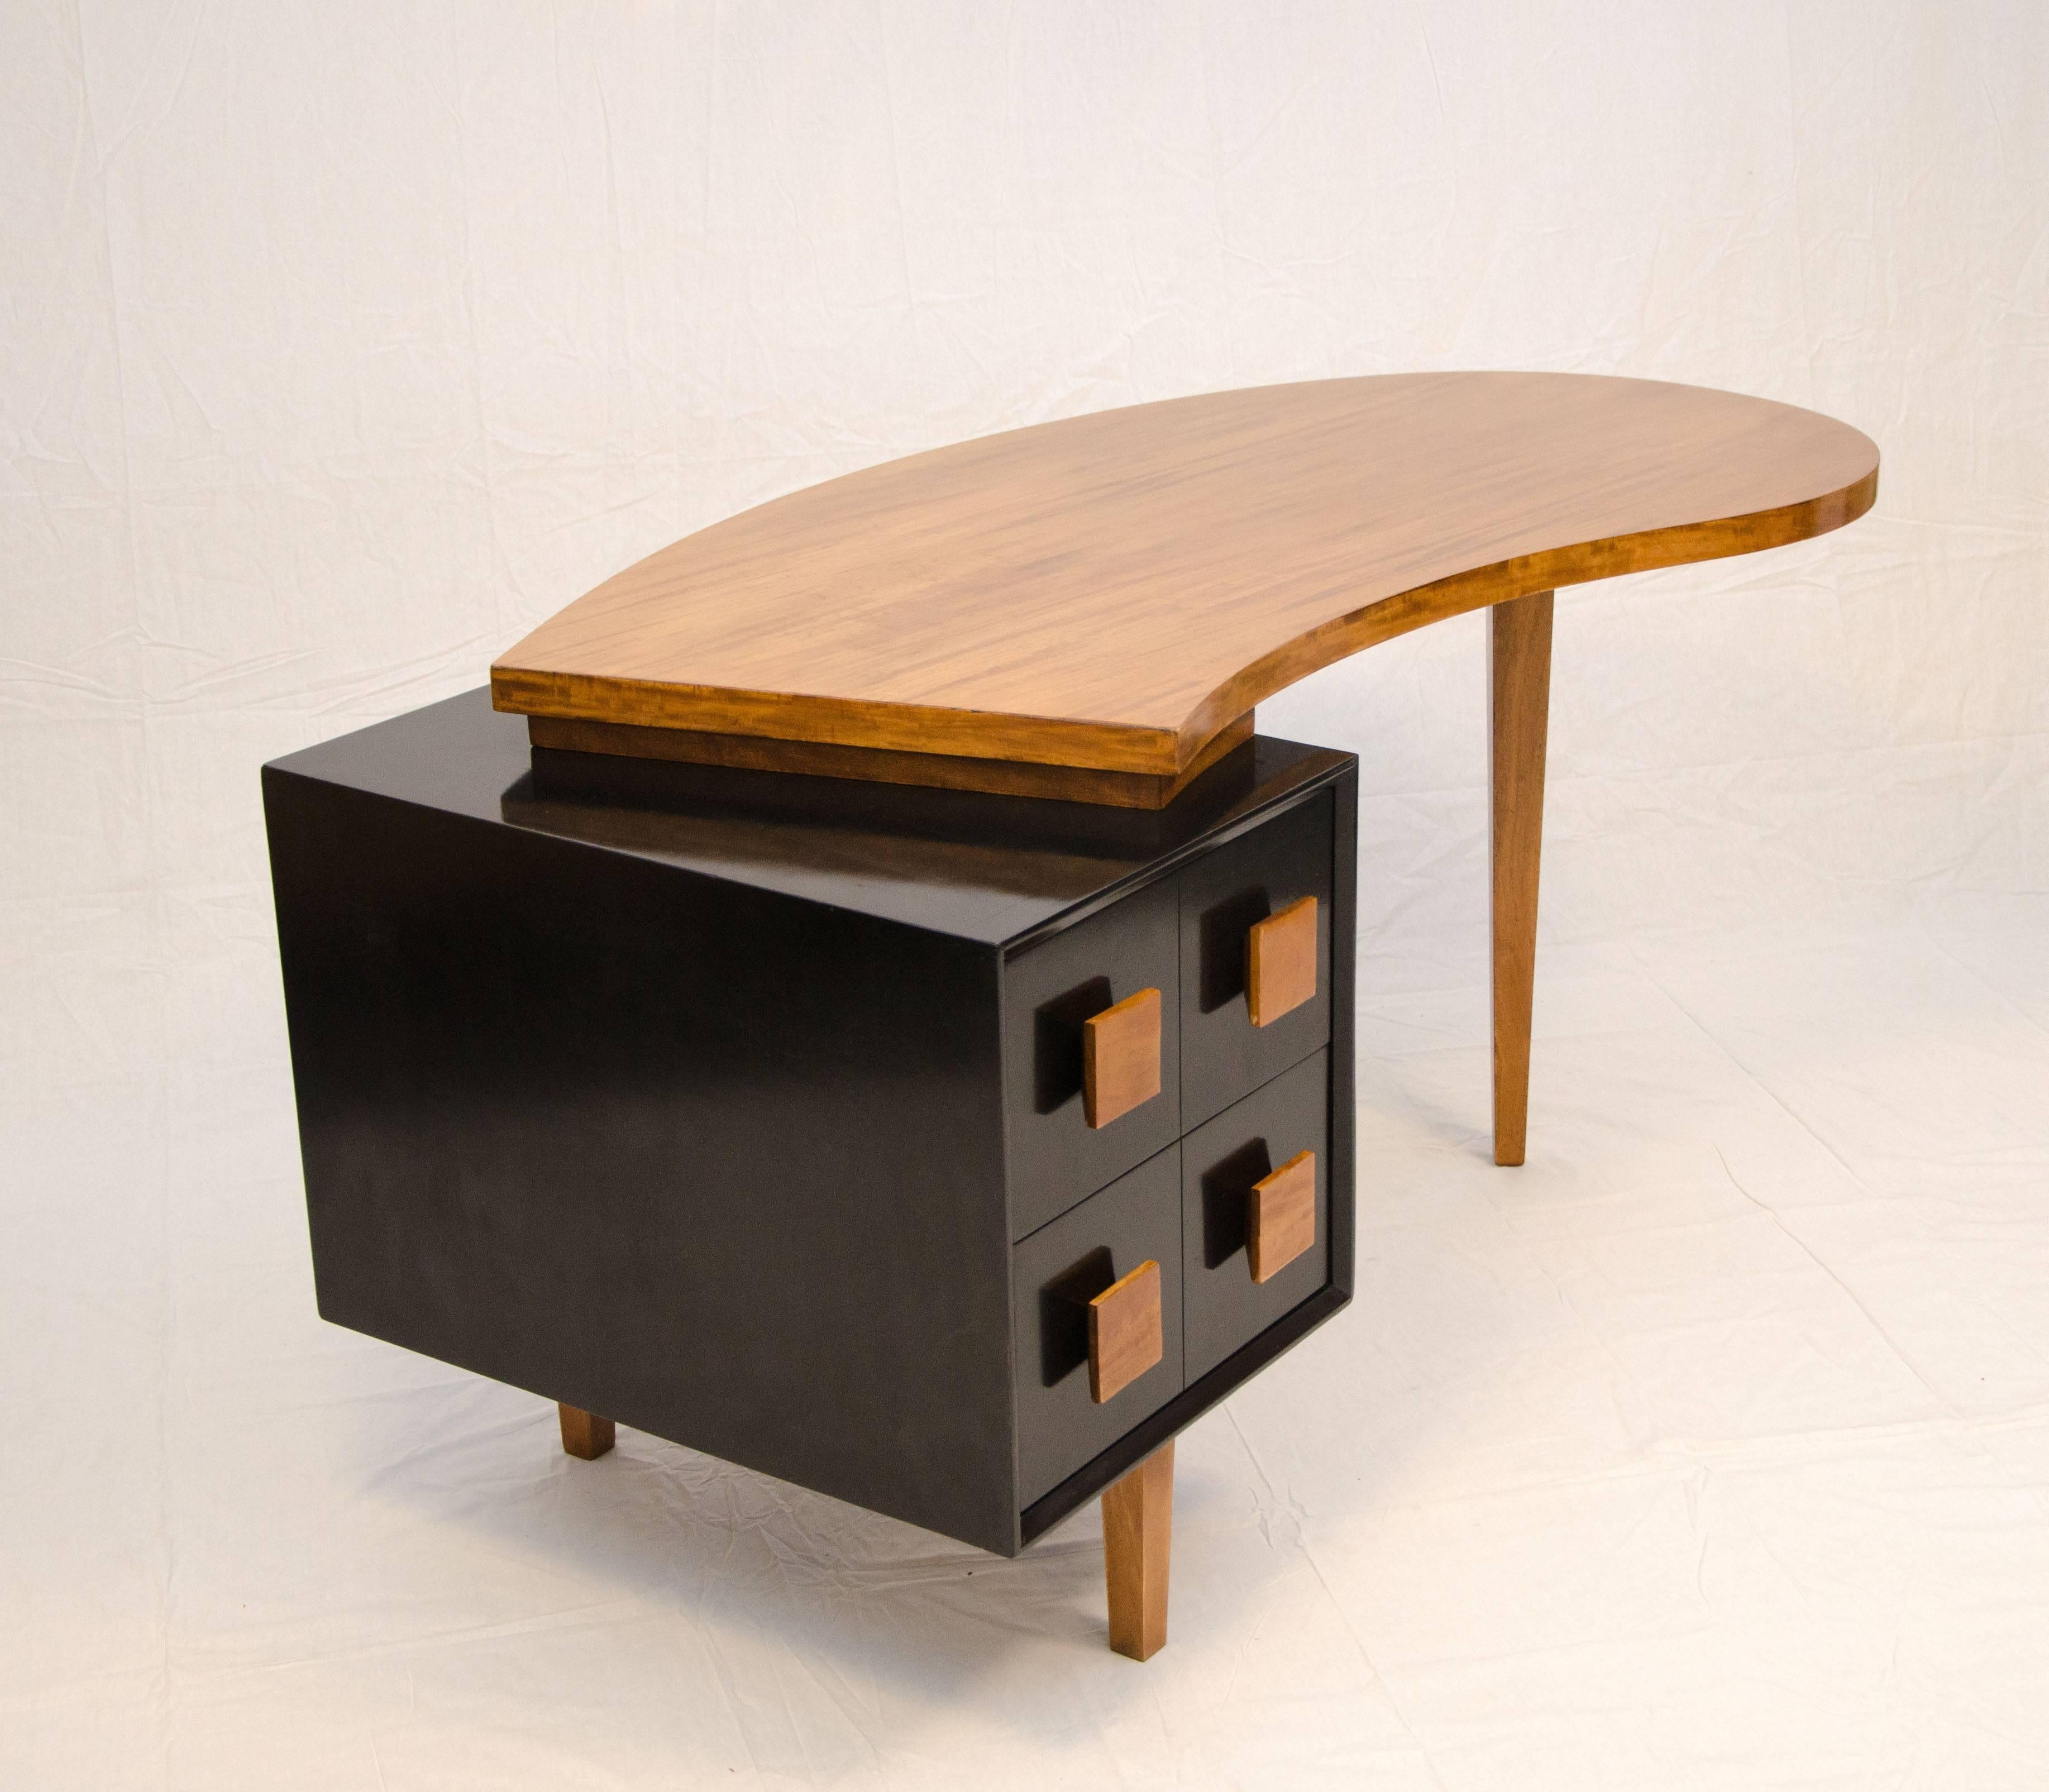 Nice American made desk with an organic semi kidney shaped top offset and a satin black lacquered drawer cabinet. The two drawers are accented by square wooded pulls matching in color with the top surface. It would look great in the centre of a toom